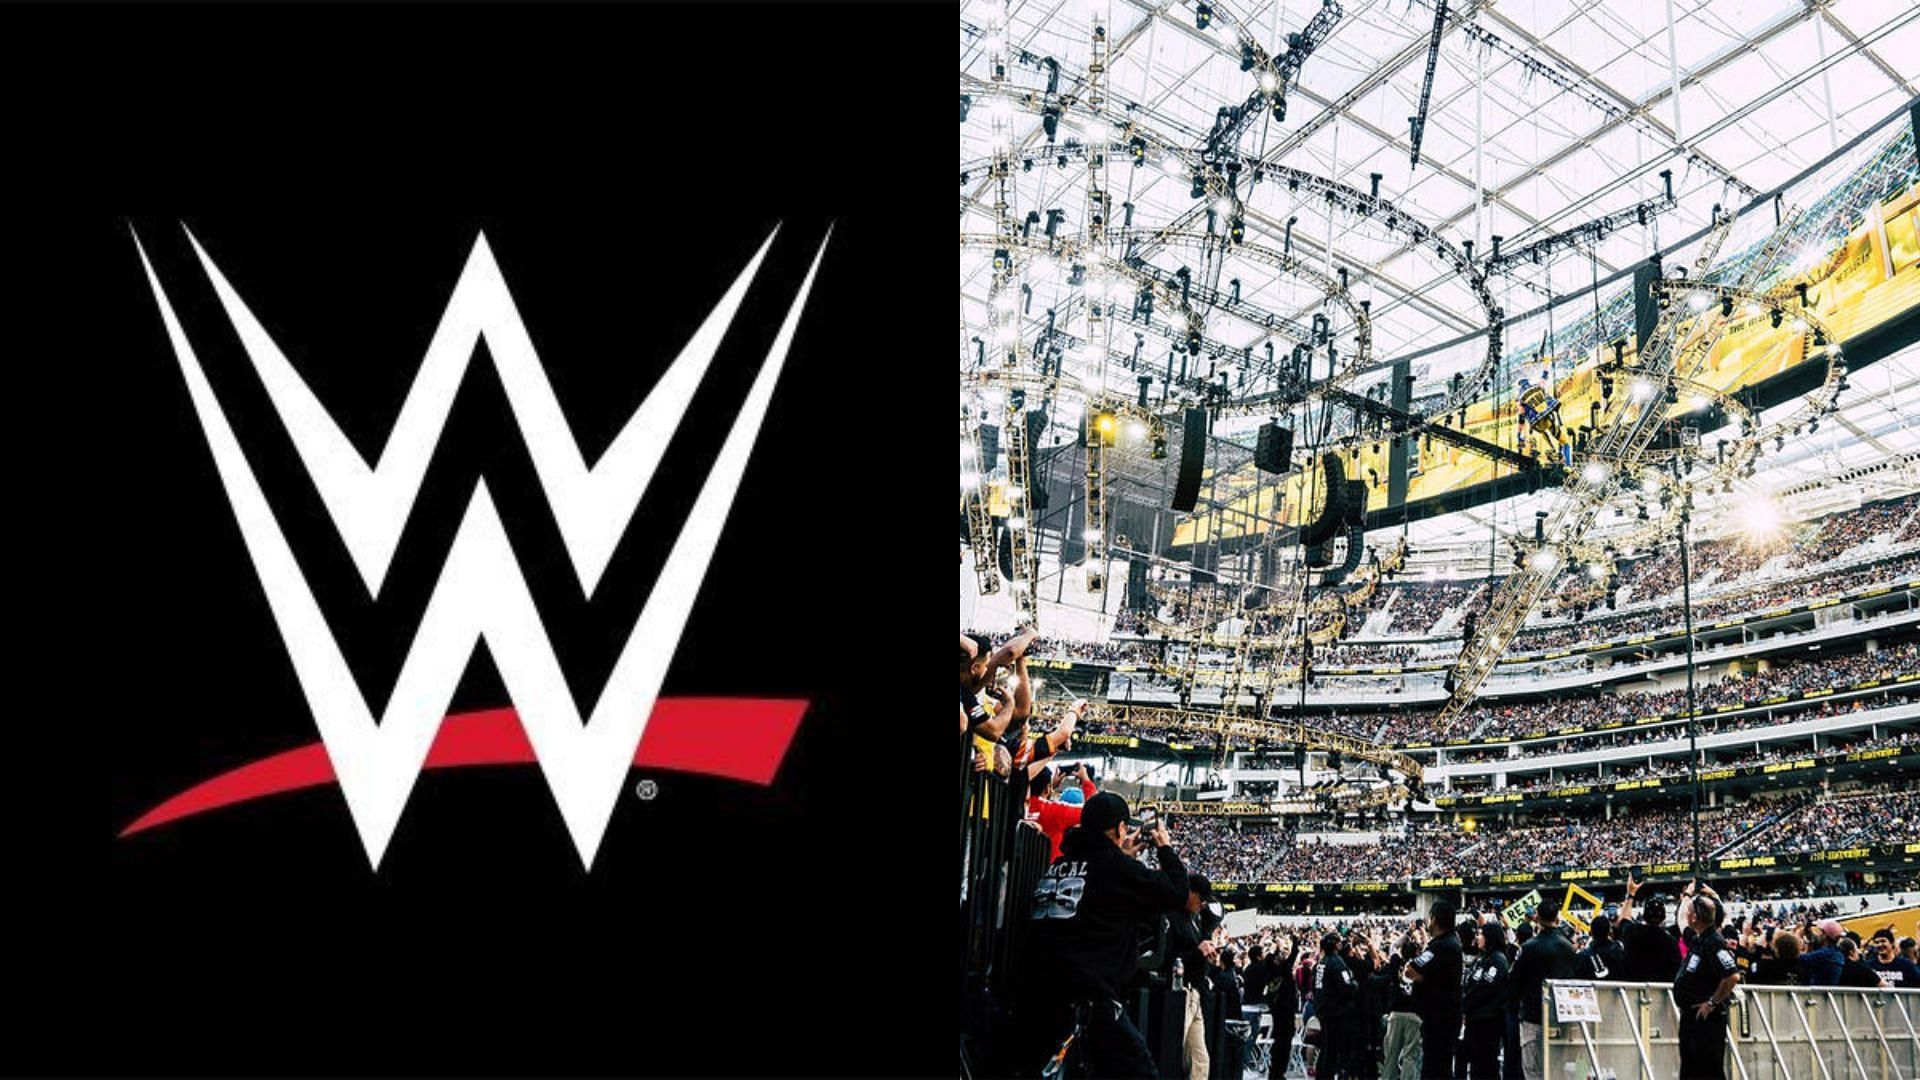 WWE is a Stamford-based wrestling promotion at the top of the industry today [Photos courtesy of WWE